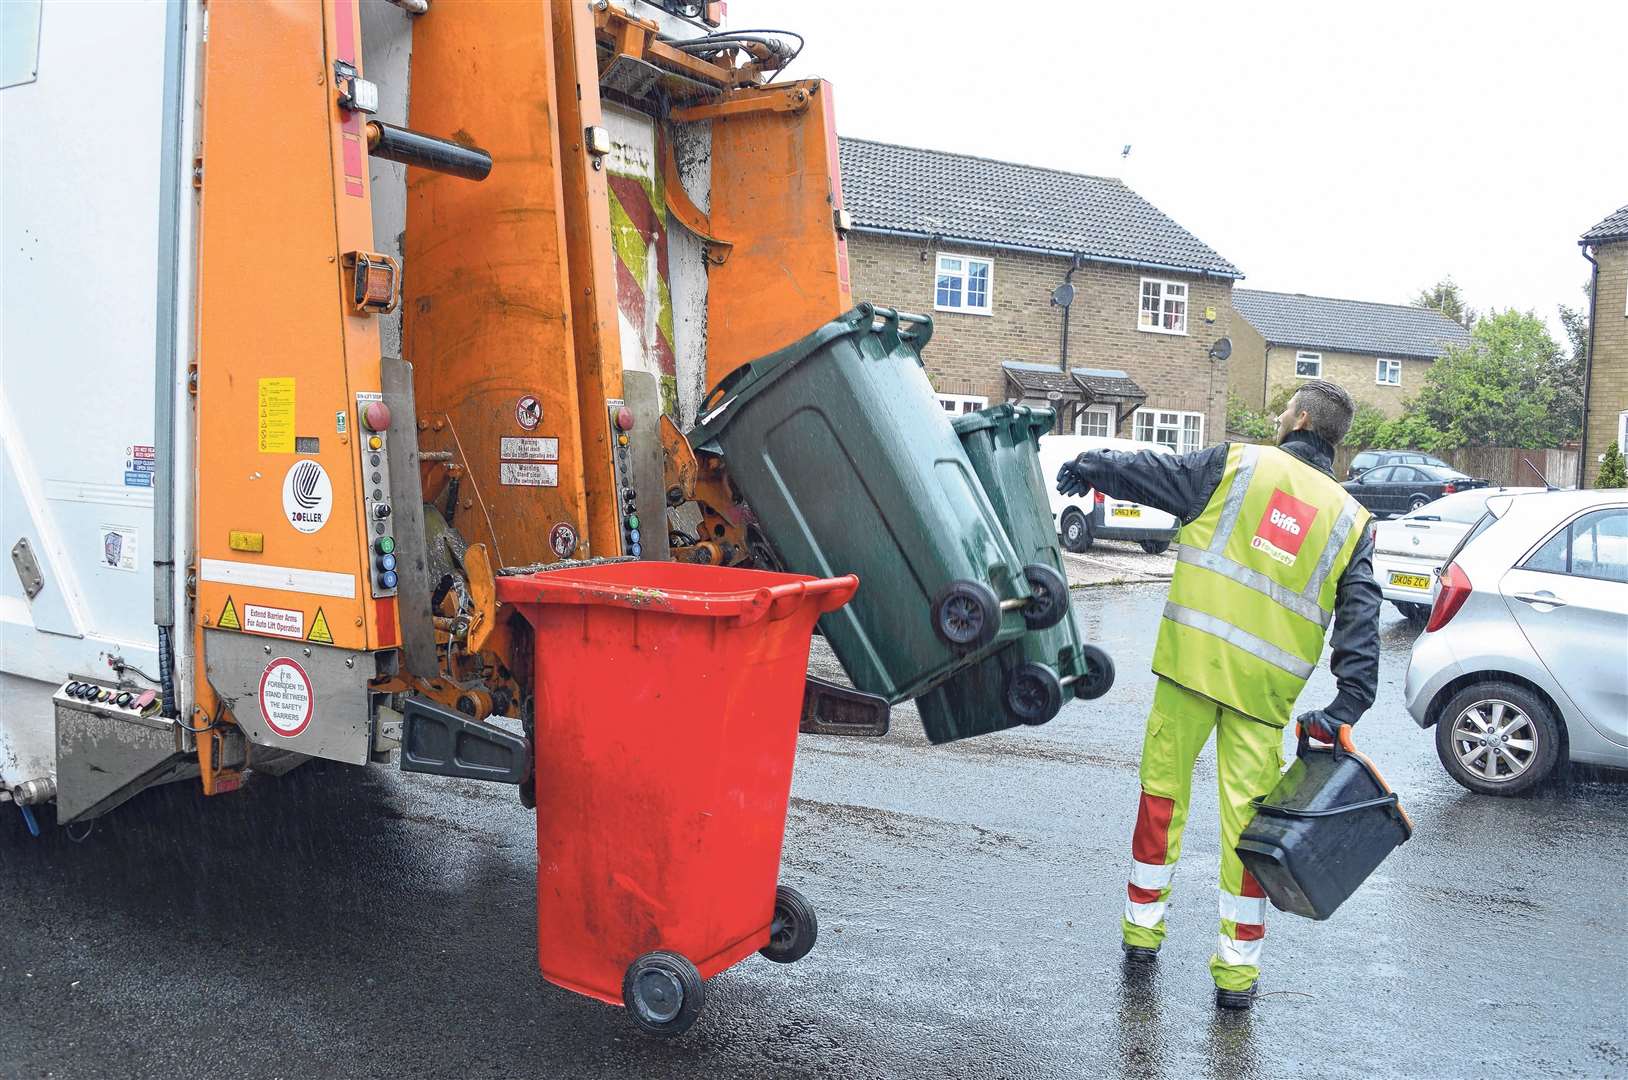 Waste movement could be disrupted, according to the report